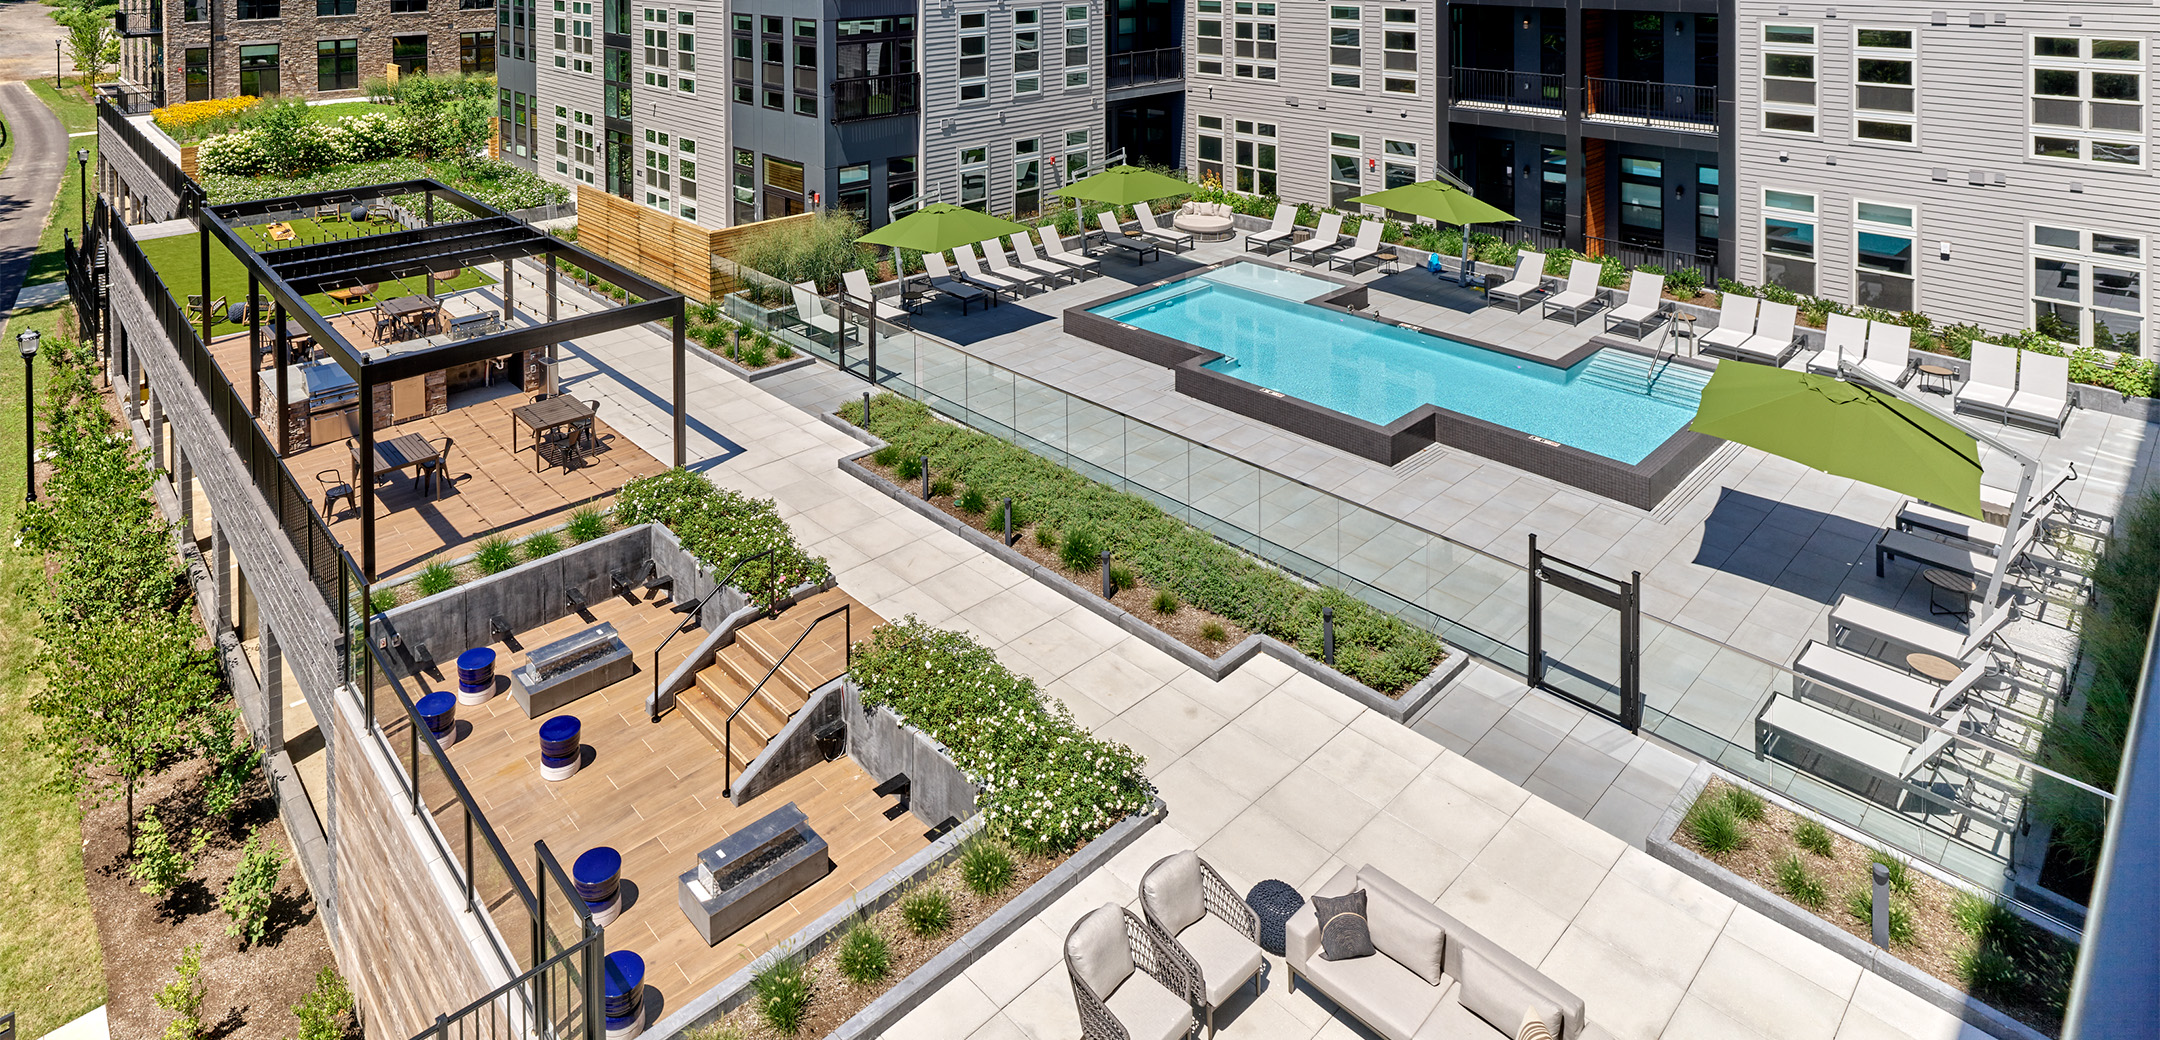 An aerial view of Matson Mill Apartment's outdoor terrace featuring a resort-style pool, sunken lounge, outdoor seating, and sun deck.